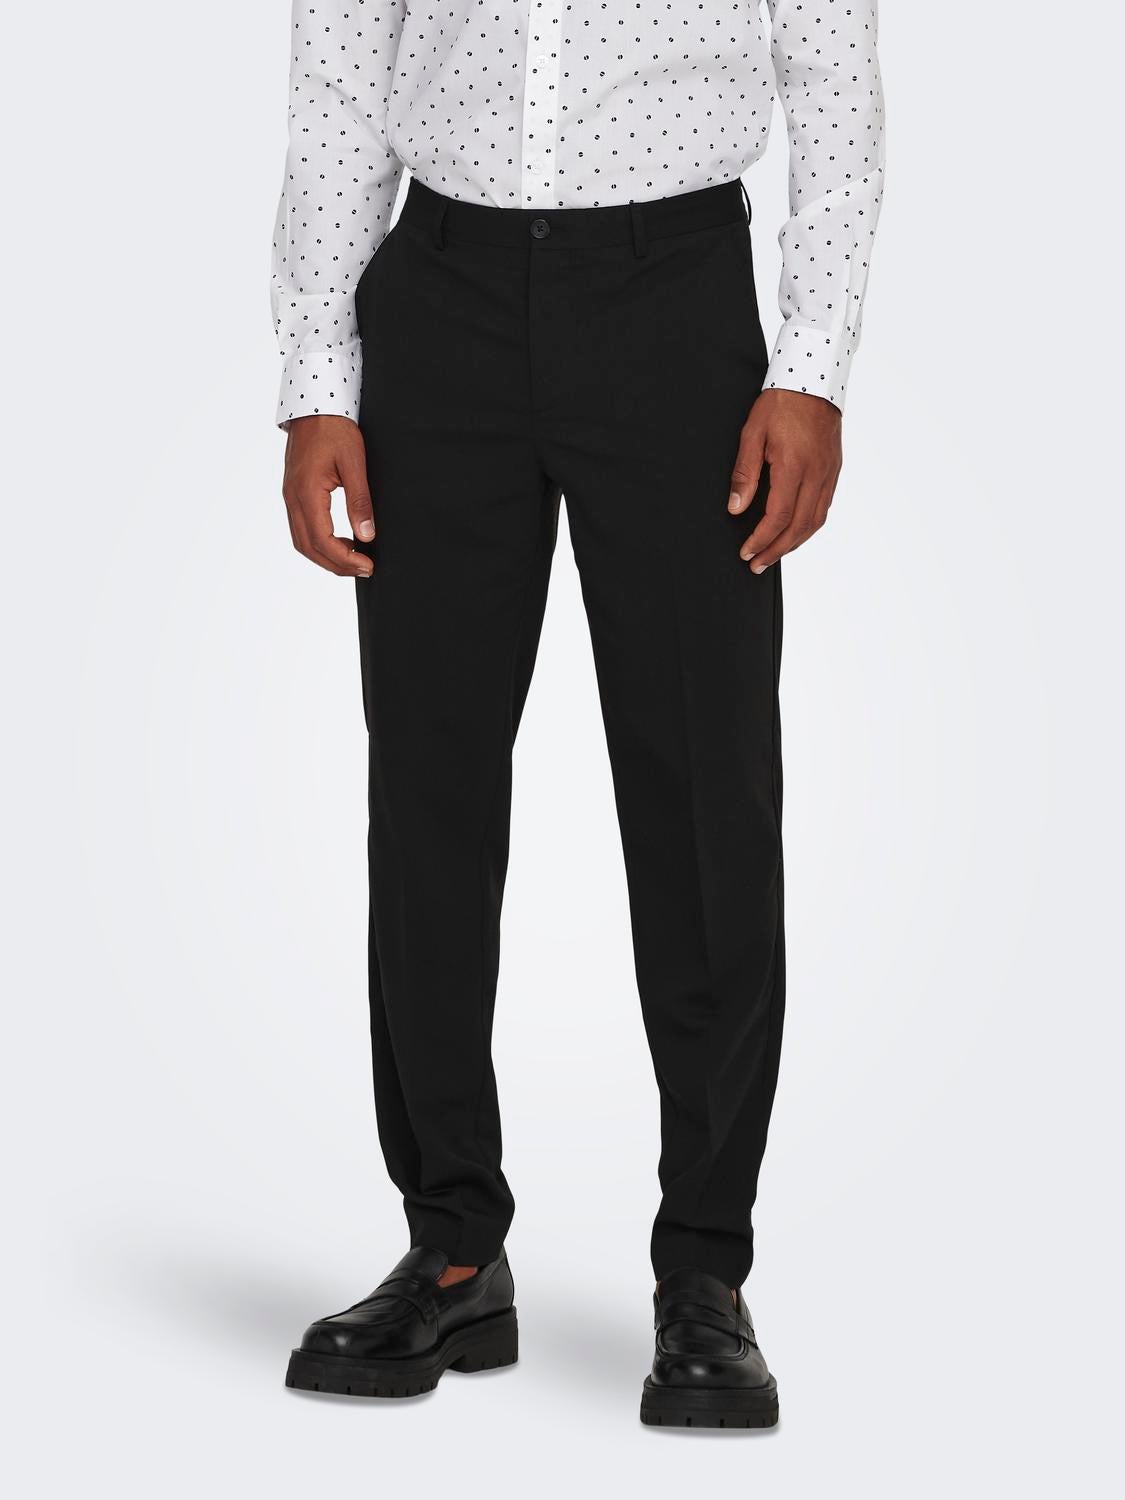 Acne Studios - Relaxed tailored trousers - Black